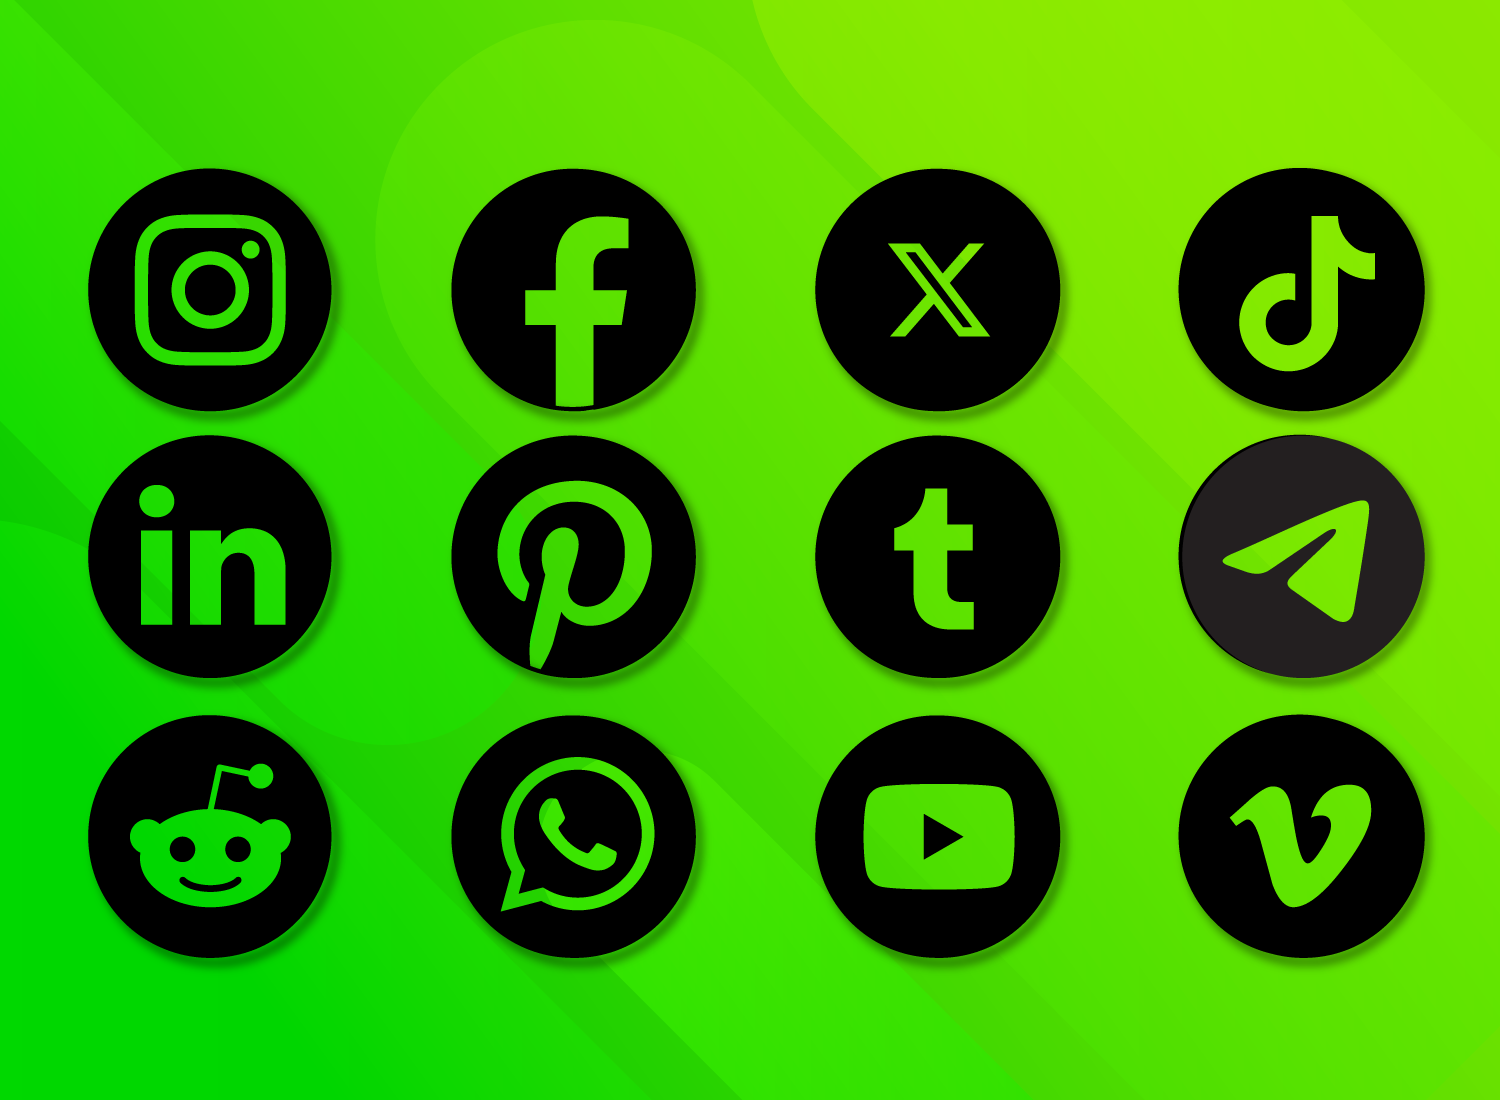 Graphic with a collection of social media platform icons on a vibrant green background. Icons include Instagram, Facebook, X, TikTok, LinkedIn, Pinterest, Tumblr, Telegram, Reddit, WhatsApp, YouTube, and Vimeo, all encircled in black.